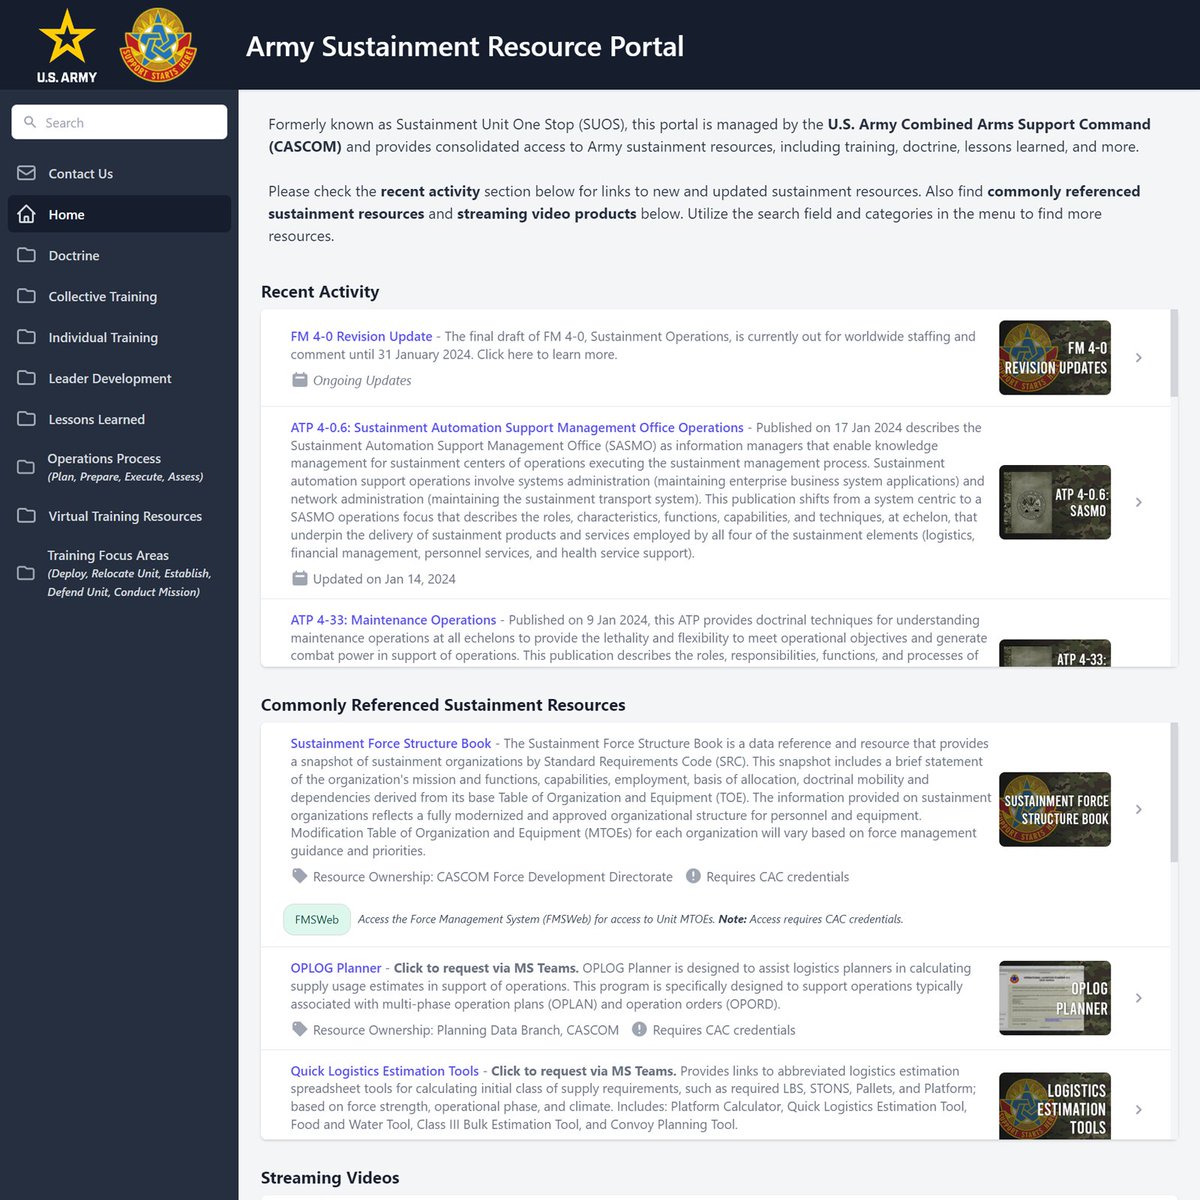 Check out the Army Sustainment Resource Portal (ASRP) for recent updates, including links to ATP 4-0.6 (SASMO), ATP 4-33 (Maint. Ops), the updated Sustainment Force Structure Book, and more!

cascom.army.mil/asrp

#CASCOM #SupportStartsHere #ArmySustainment